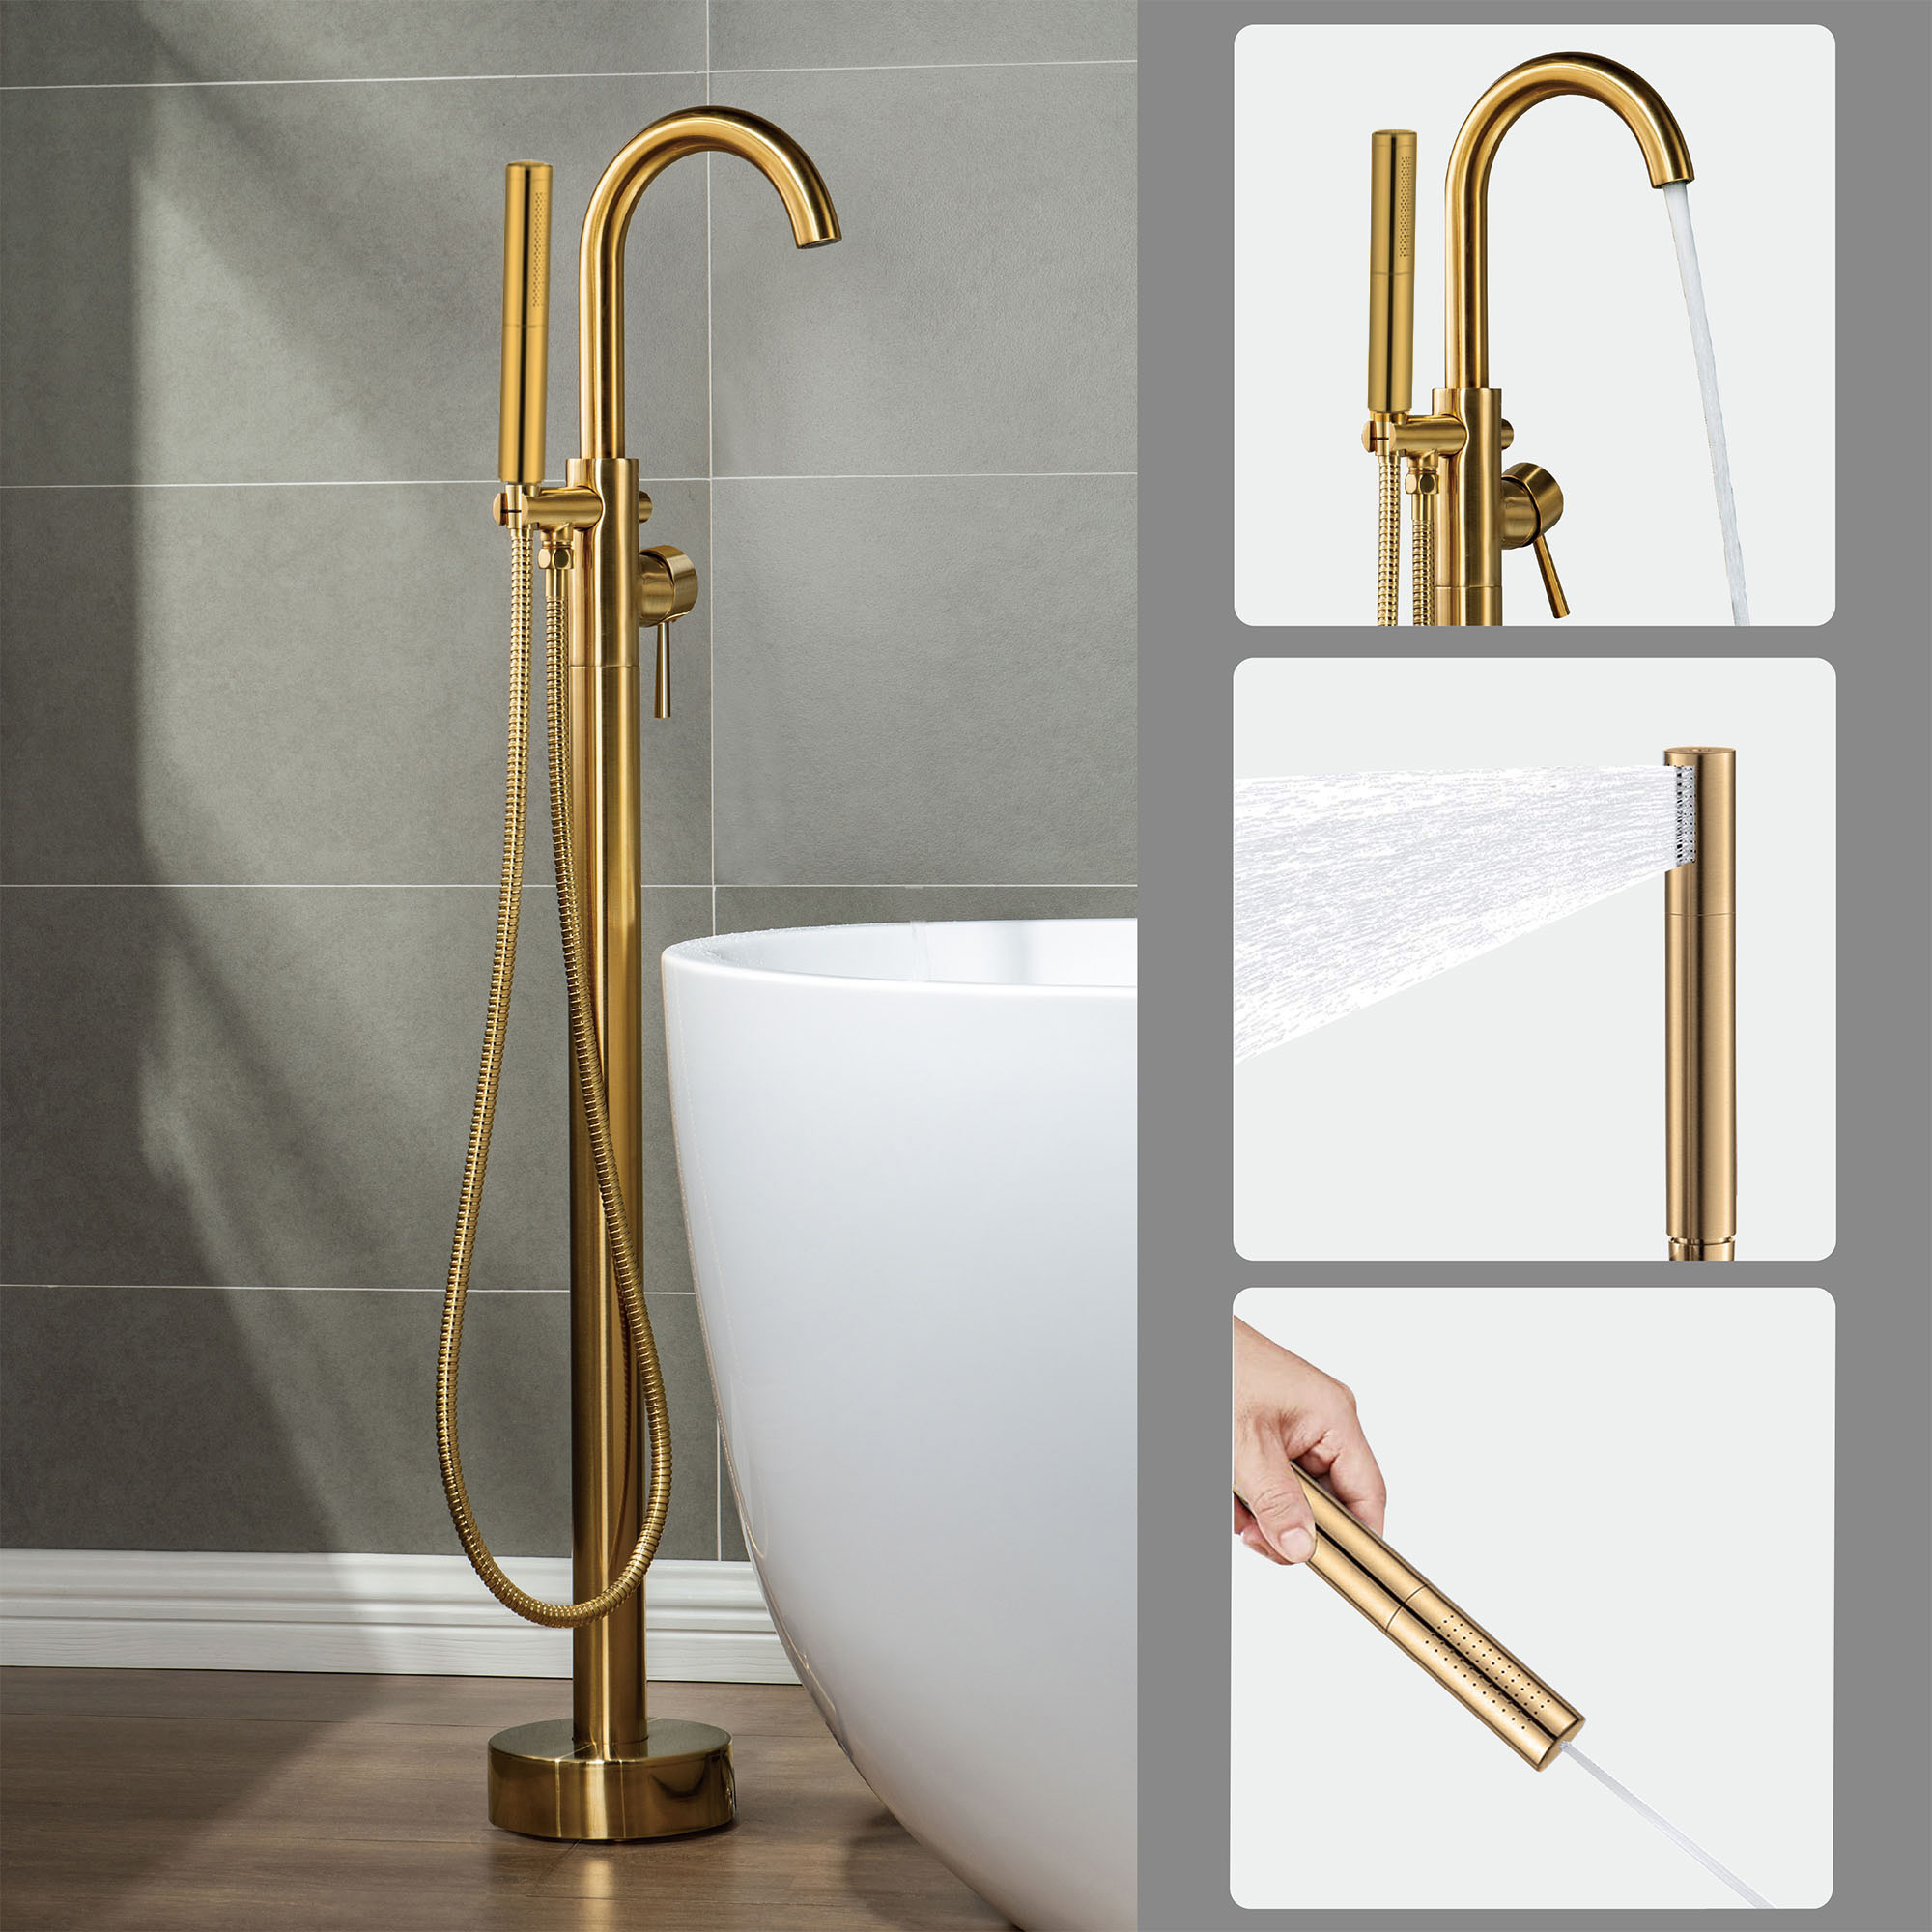 WOODBRIDGE F0007BGDR Contemporary Single Handle Floor Mount Freestanding Tub Filler Faucet with Hand shower in Brushed Gold Finish.